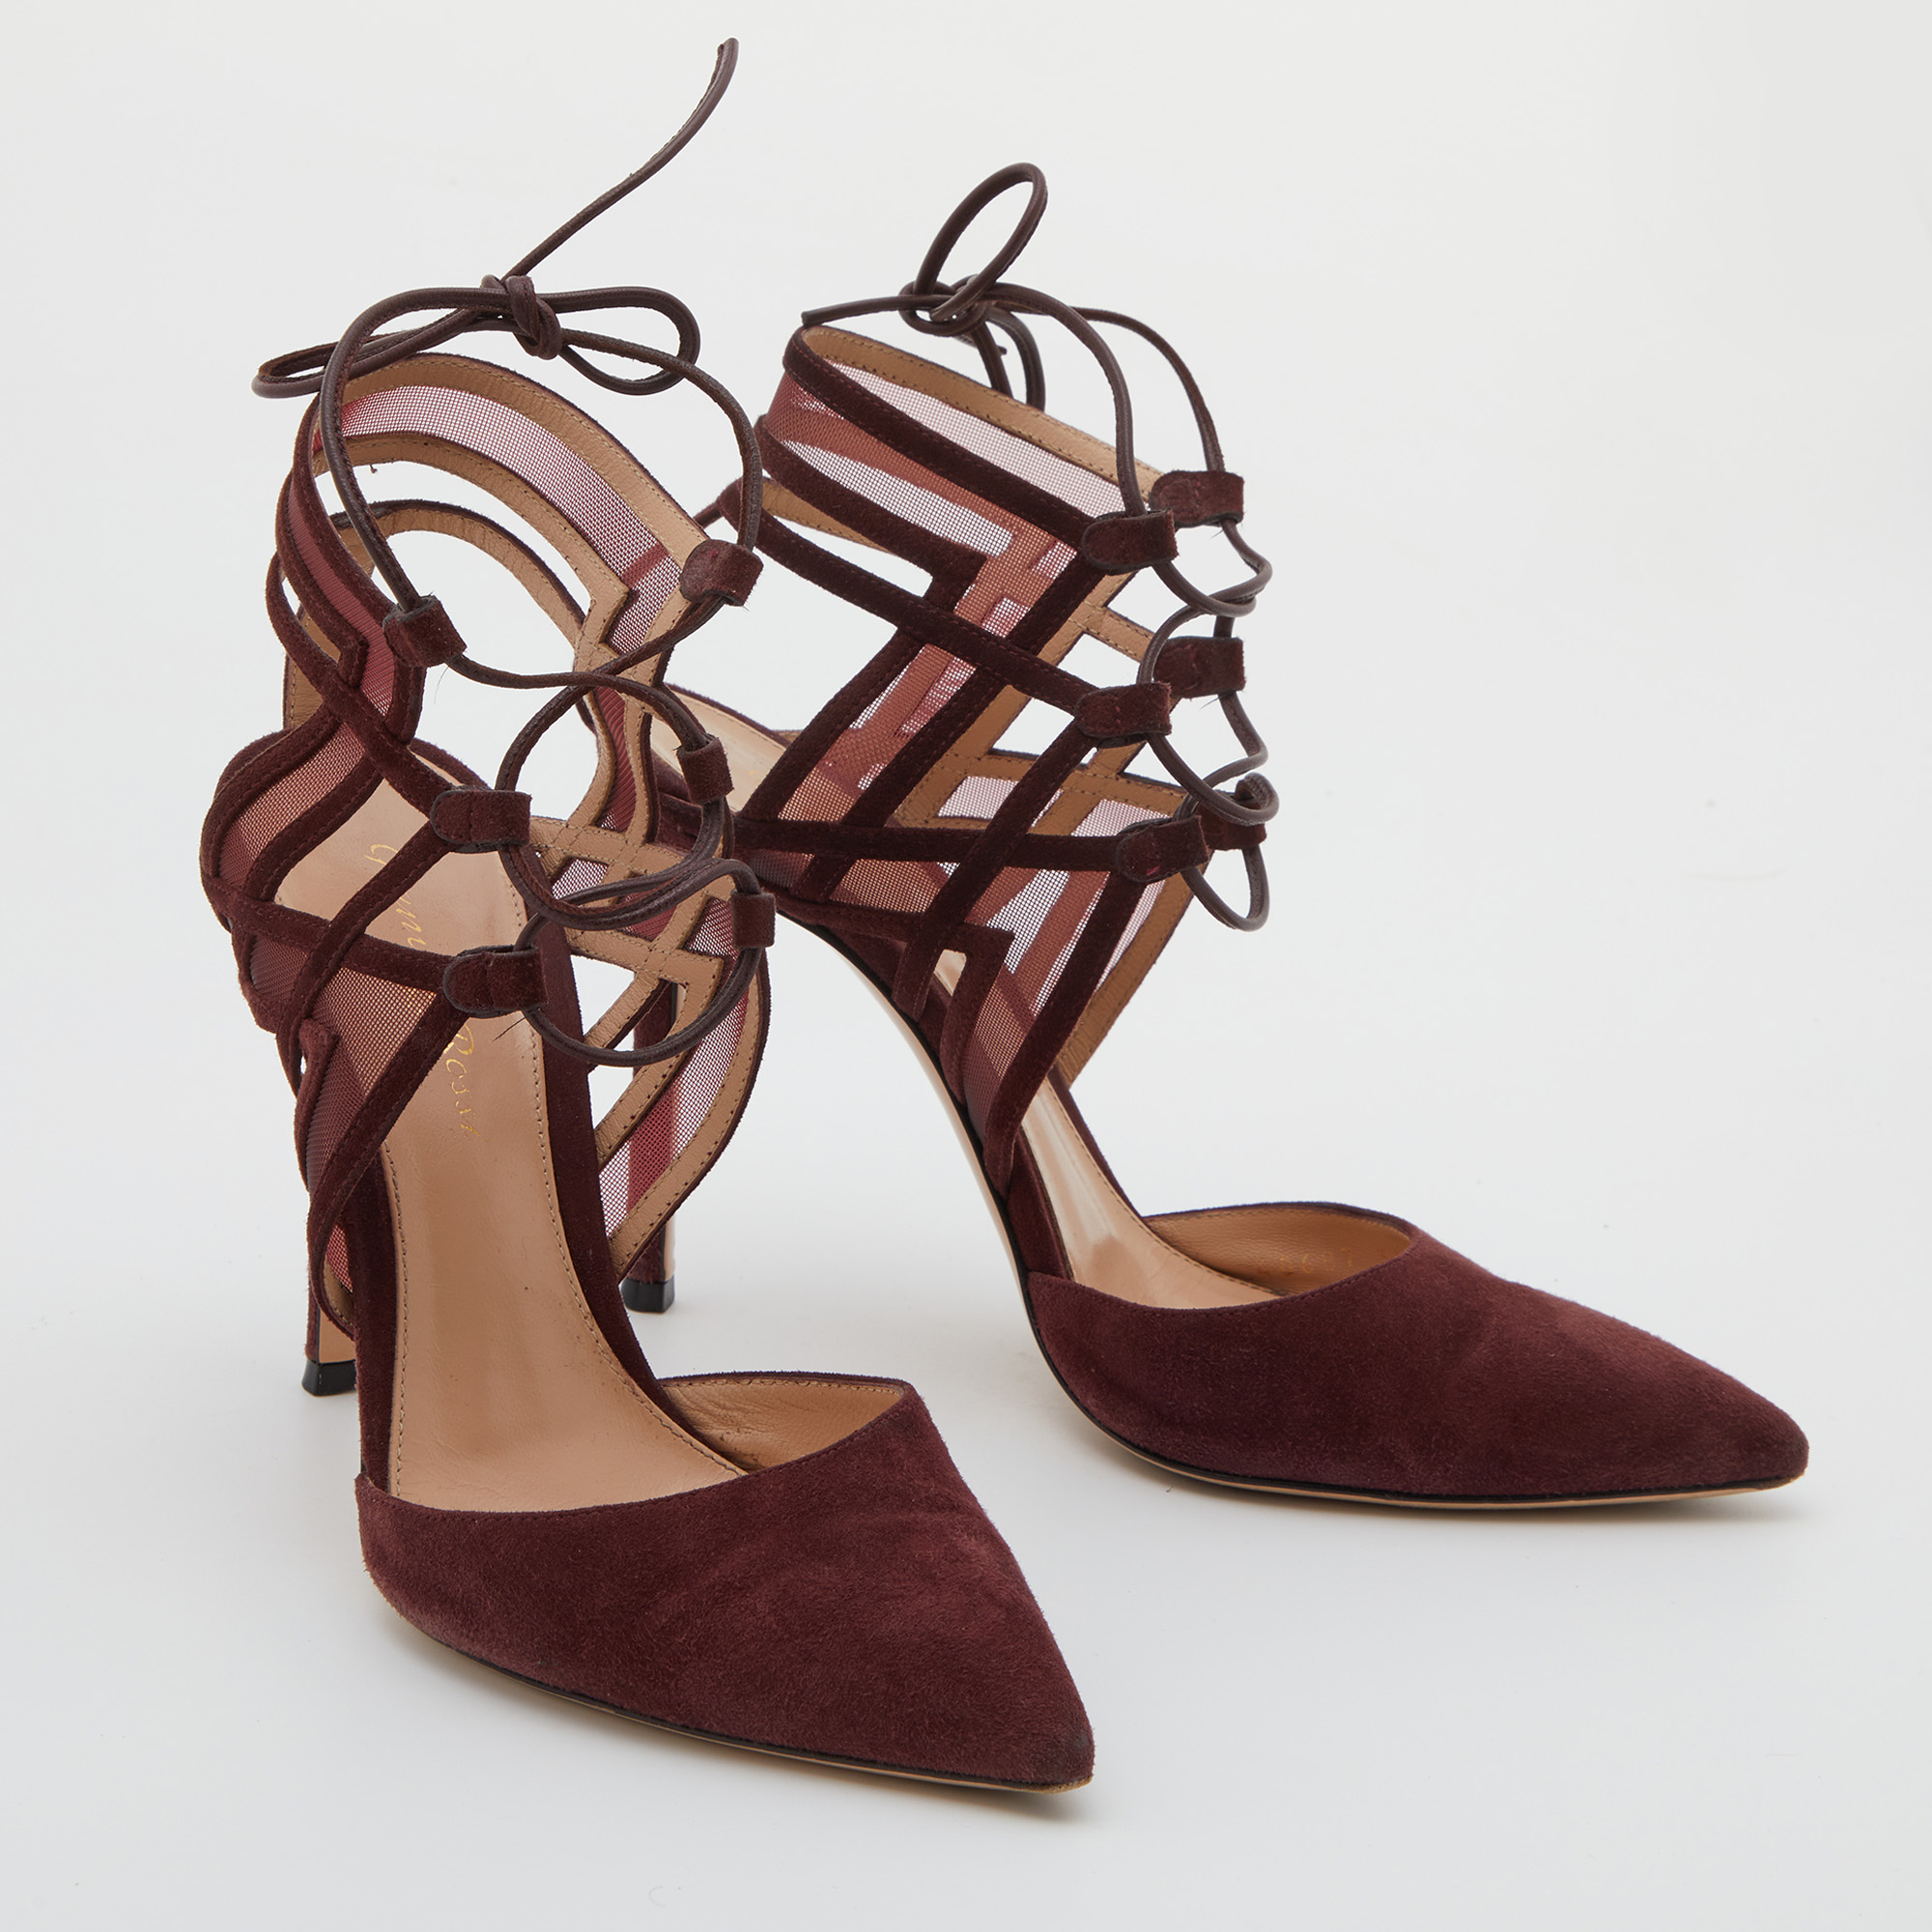 Gianvito Rossi Burgundy Suede And Mesh Ankle Wrap Sandals Size 37